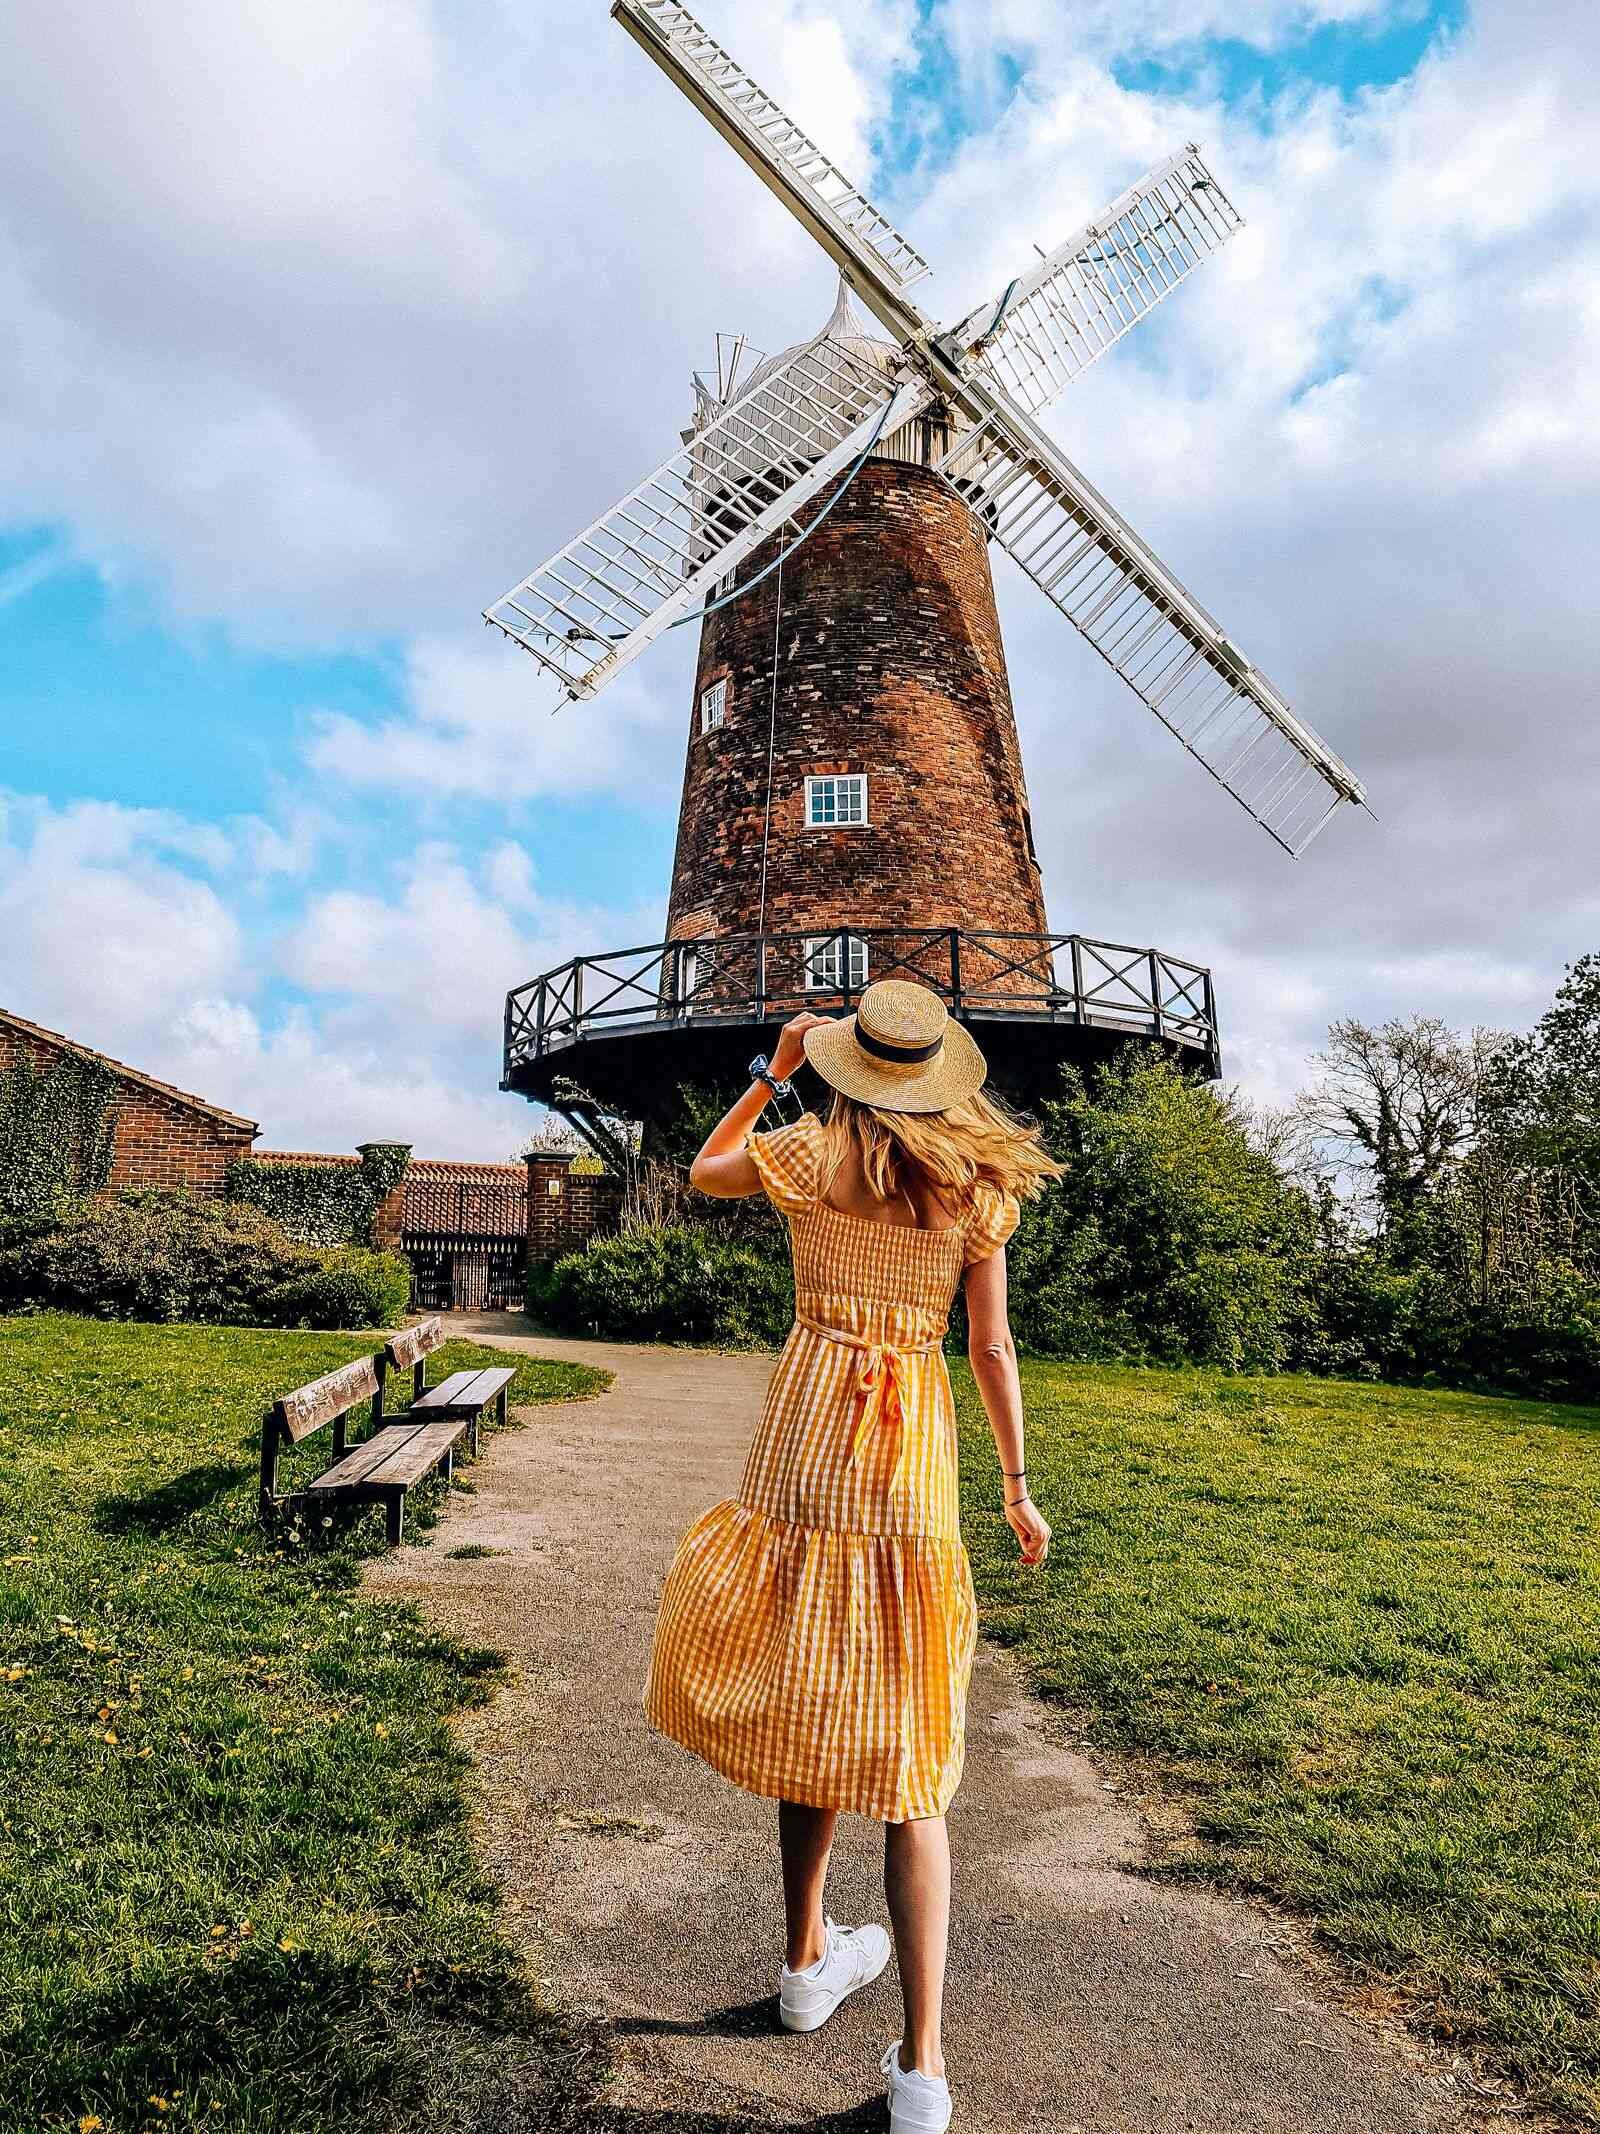 A girl in a yellow dress standing on a pathway with a old brick windmill in the distance